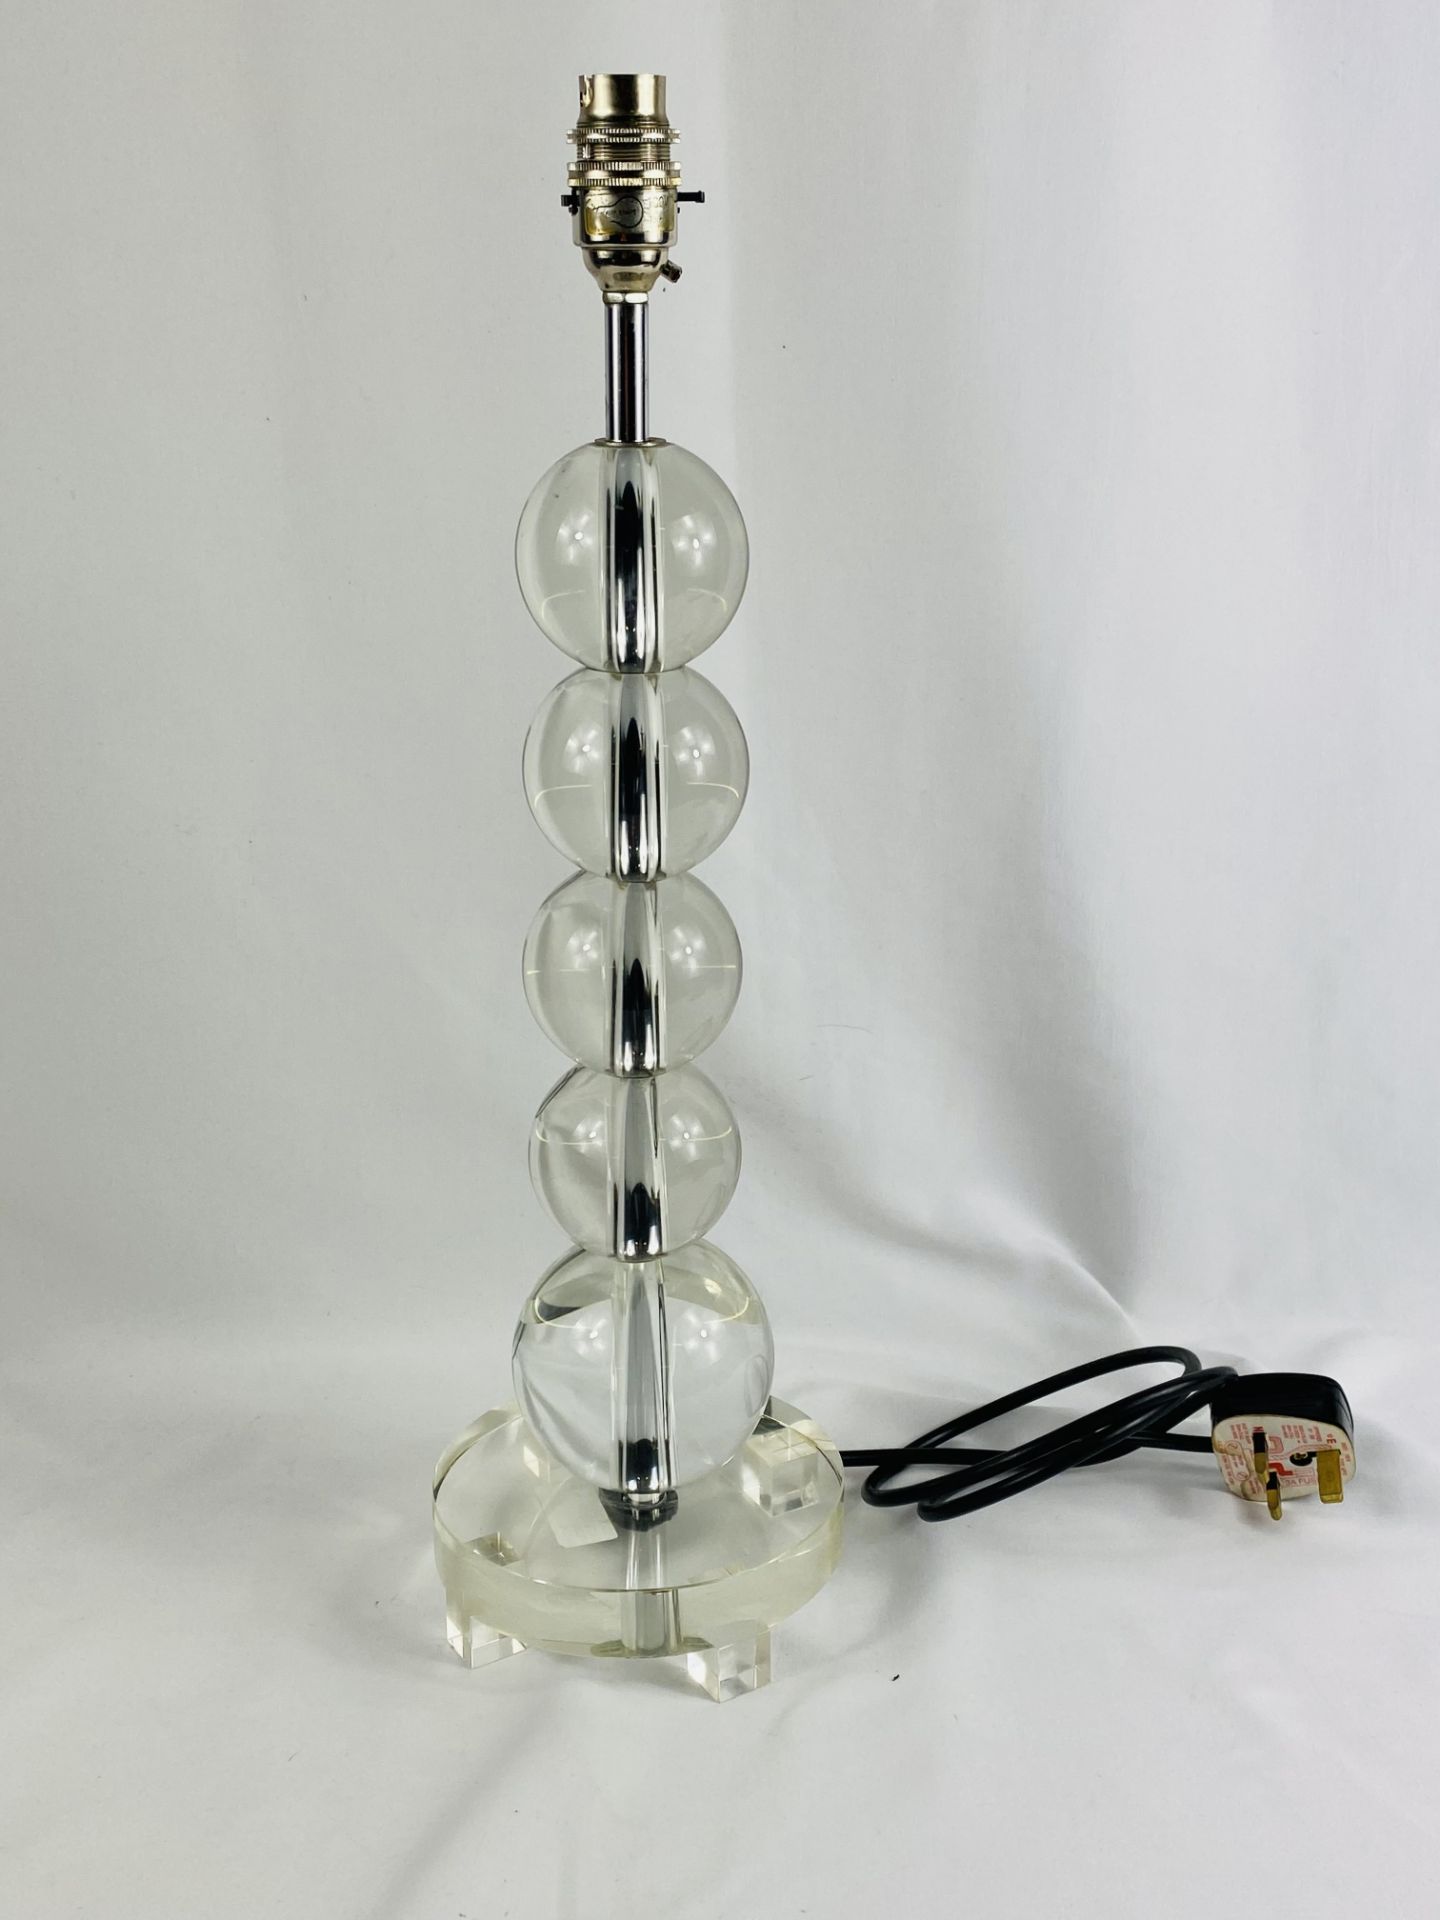 Contemporary glass and chrome table lamp - Image 2 of 5